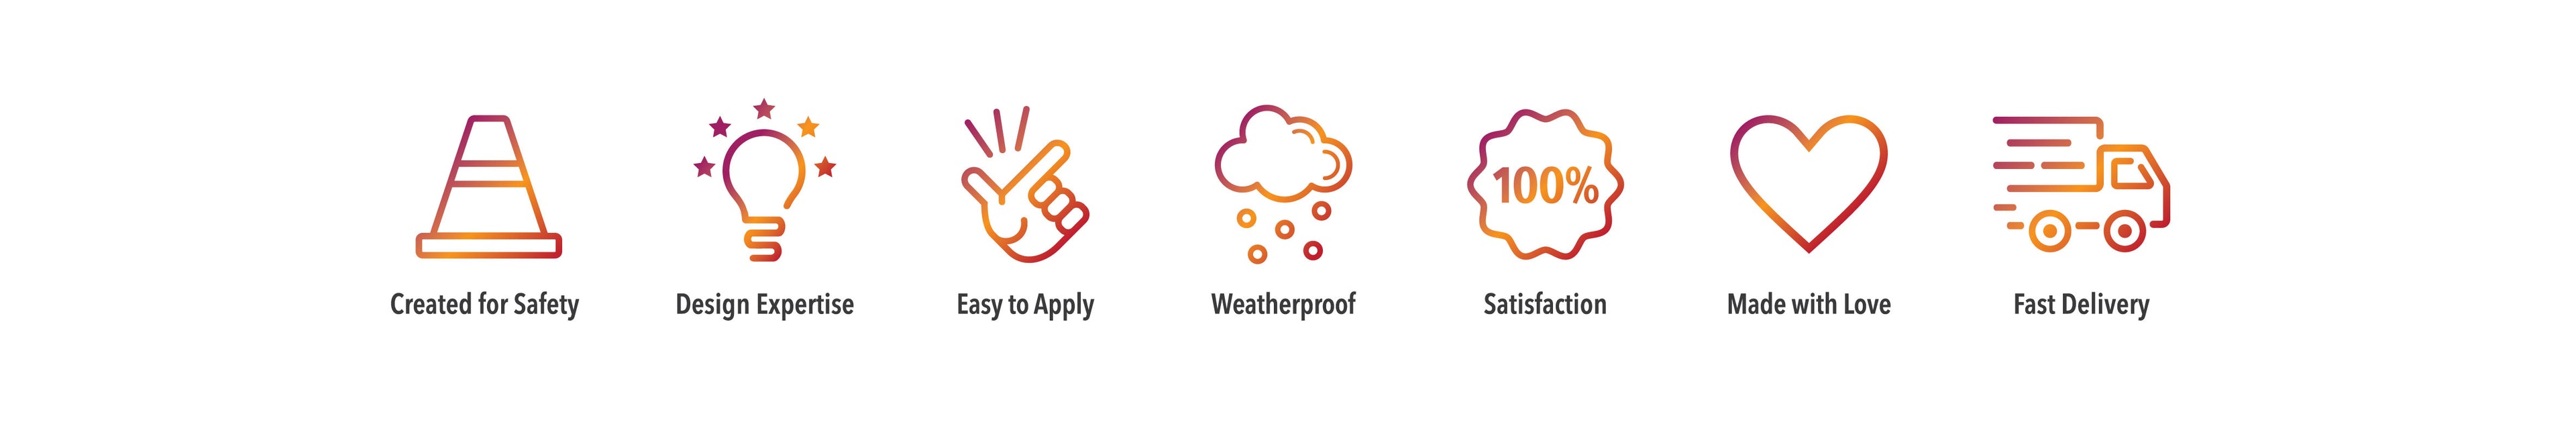 Our Happiness Pledge icon bar illustrating our directives: Created for safety, Design expertise, Easy to apply, weatherproof, Satisfaction, made with love and fast delivery!